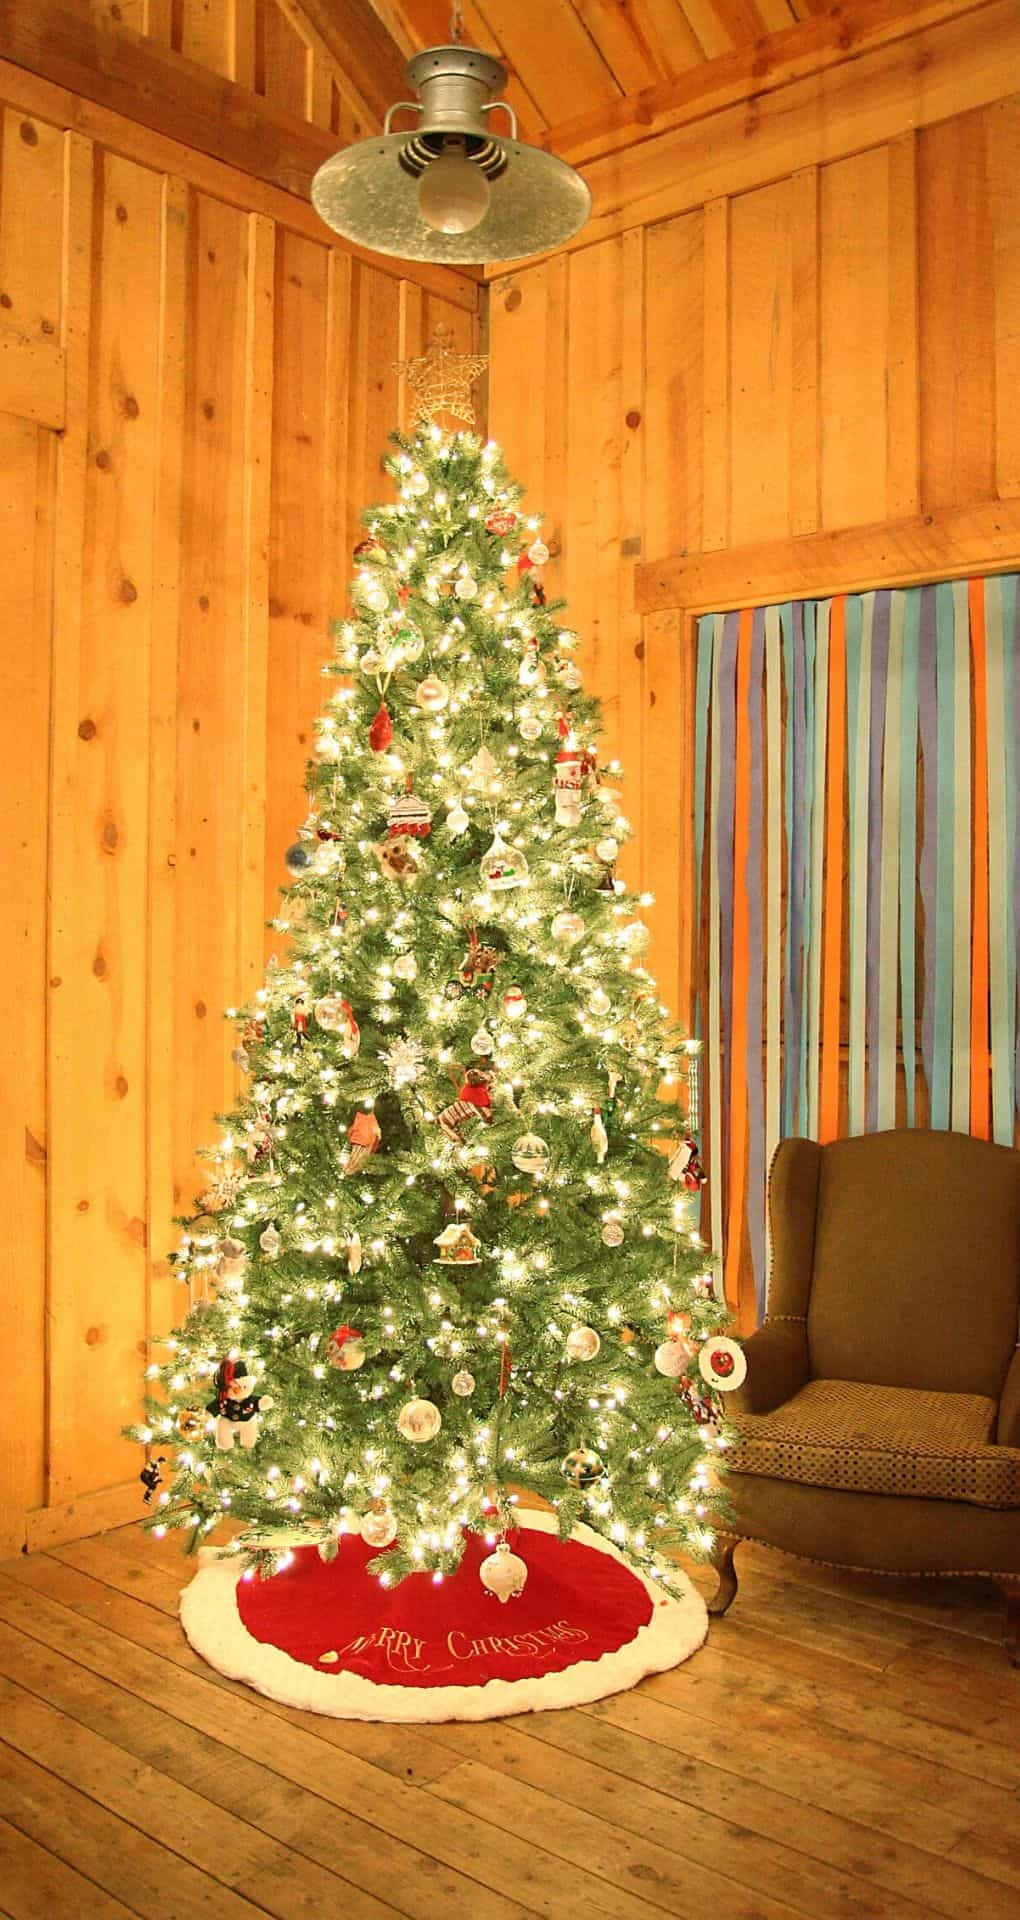 'Bring the spirit of Christmas into your home with an Aesthetic Christmas Tree' Wallpaper